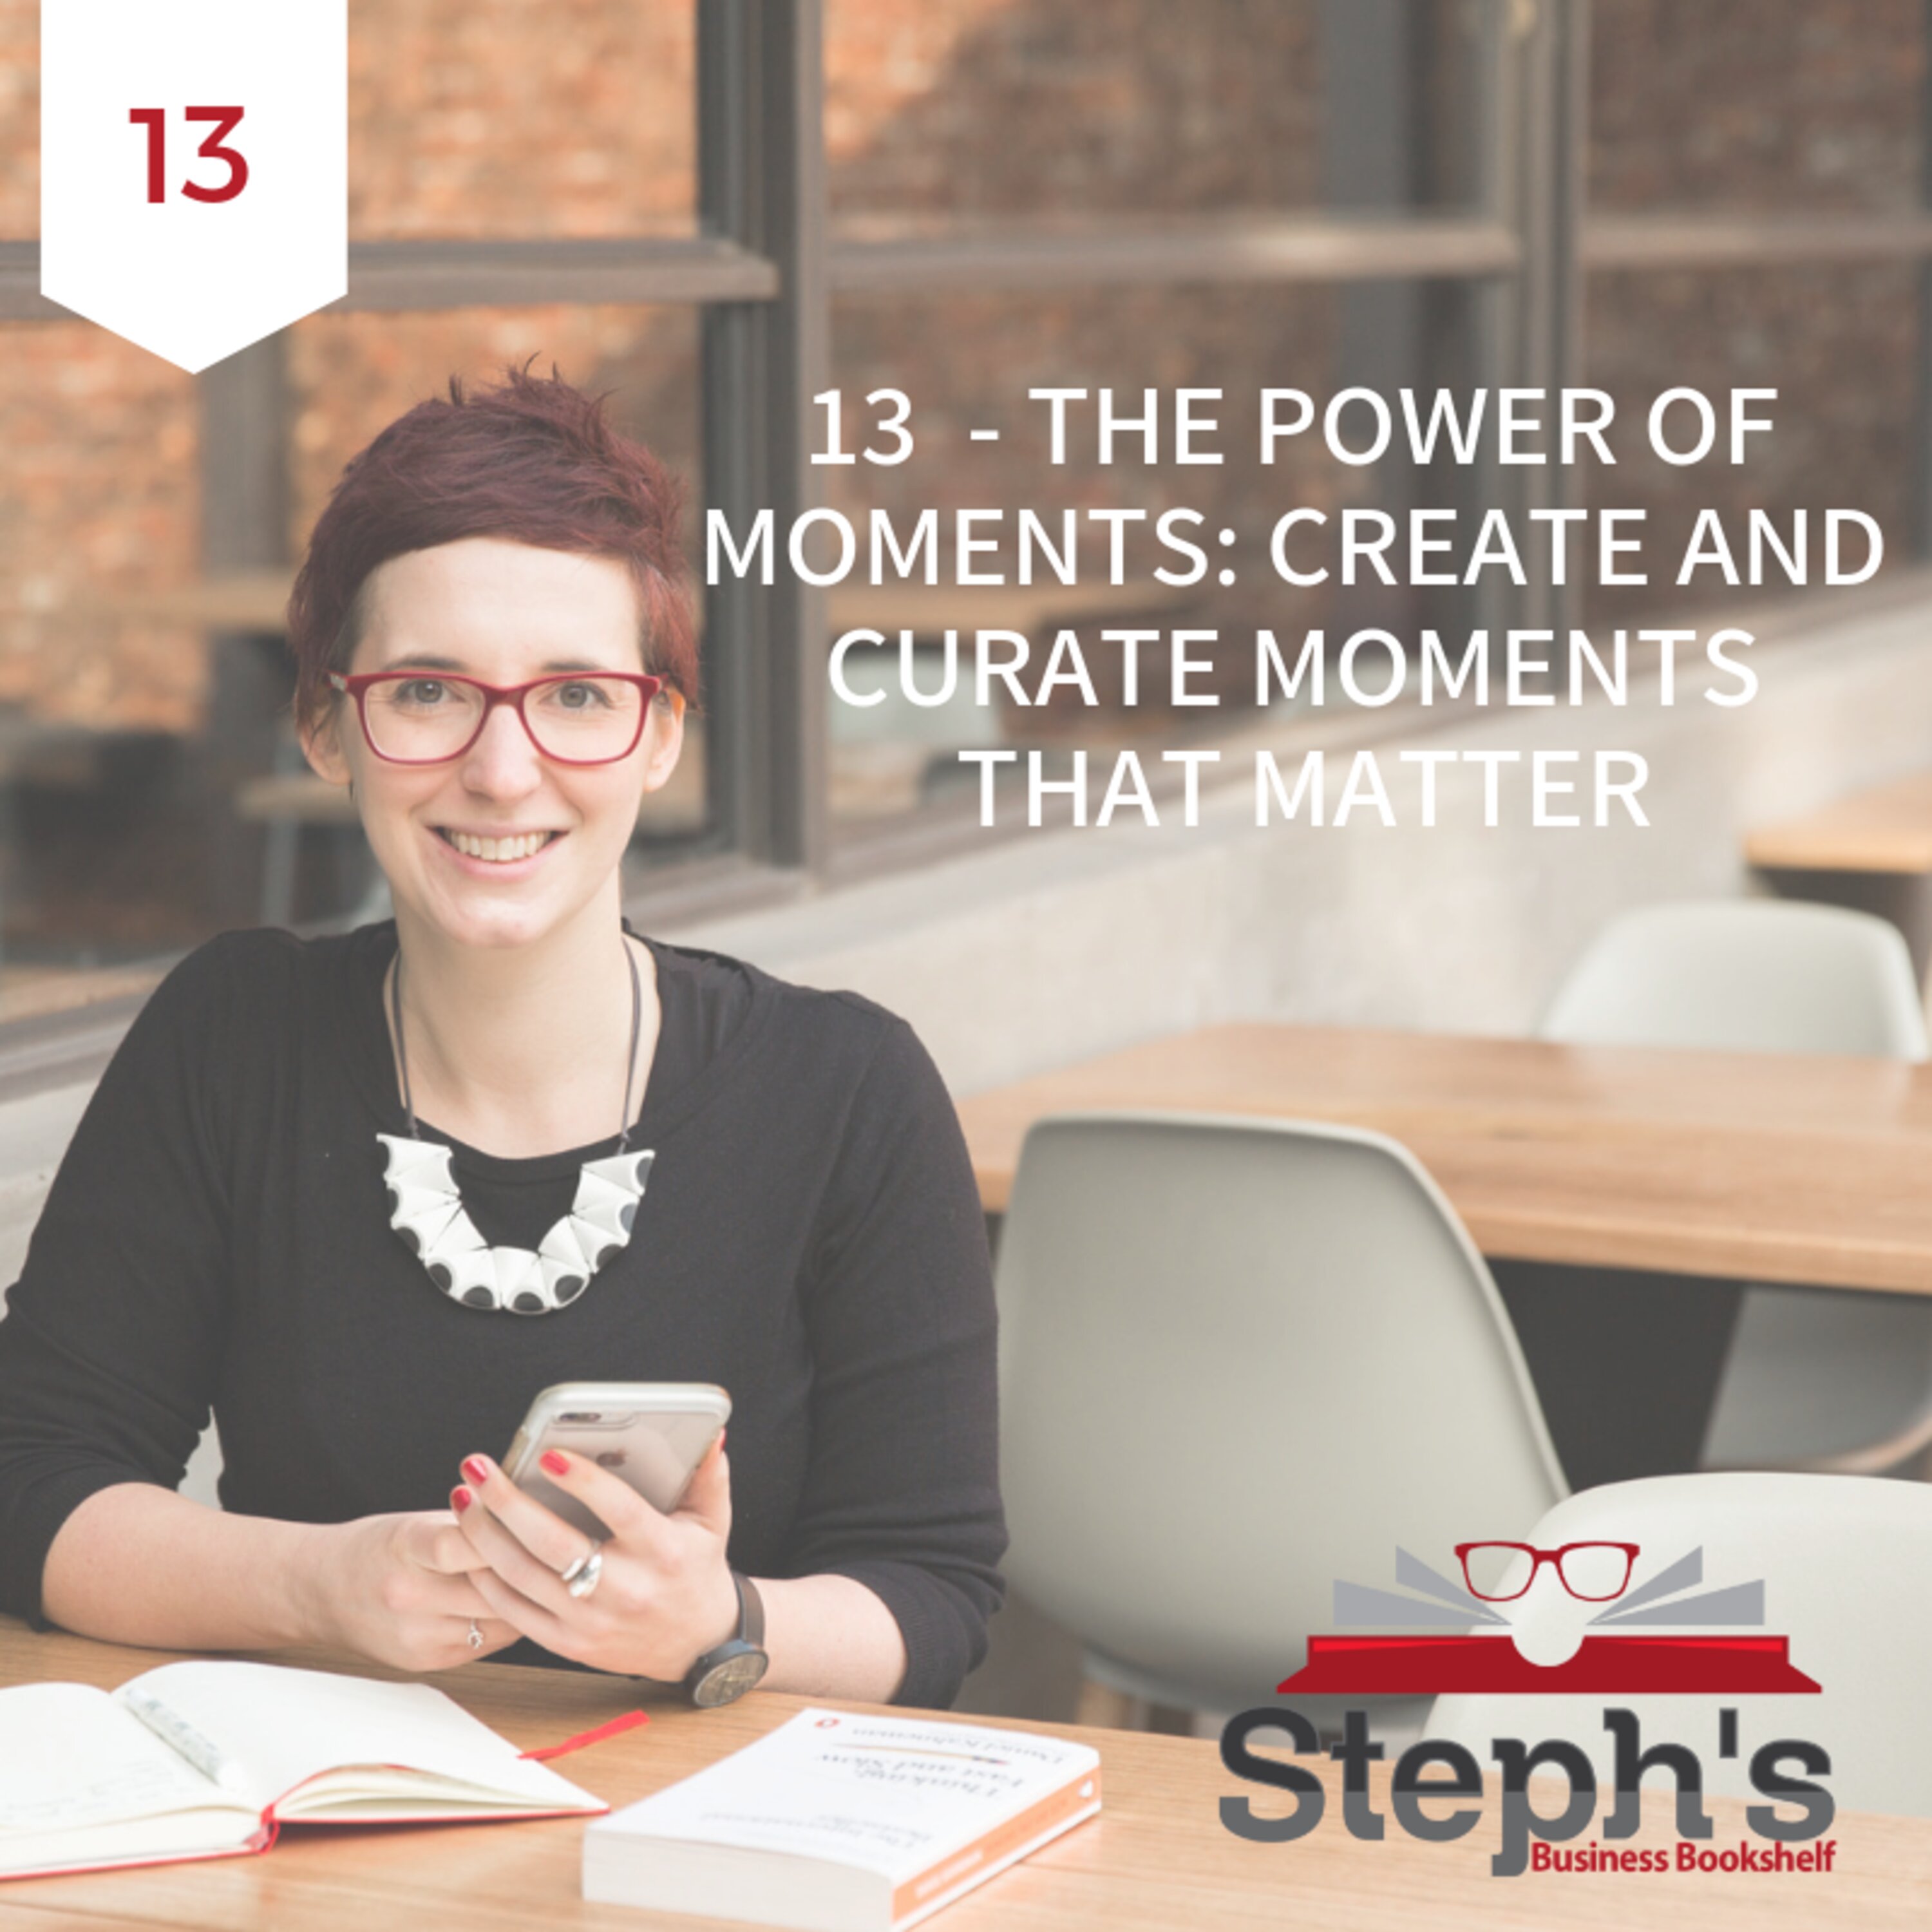 The power of moments by Chip Heath and Dan Heath: create and curate moments that matter Image